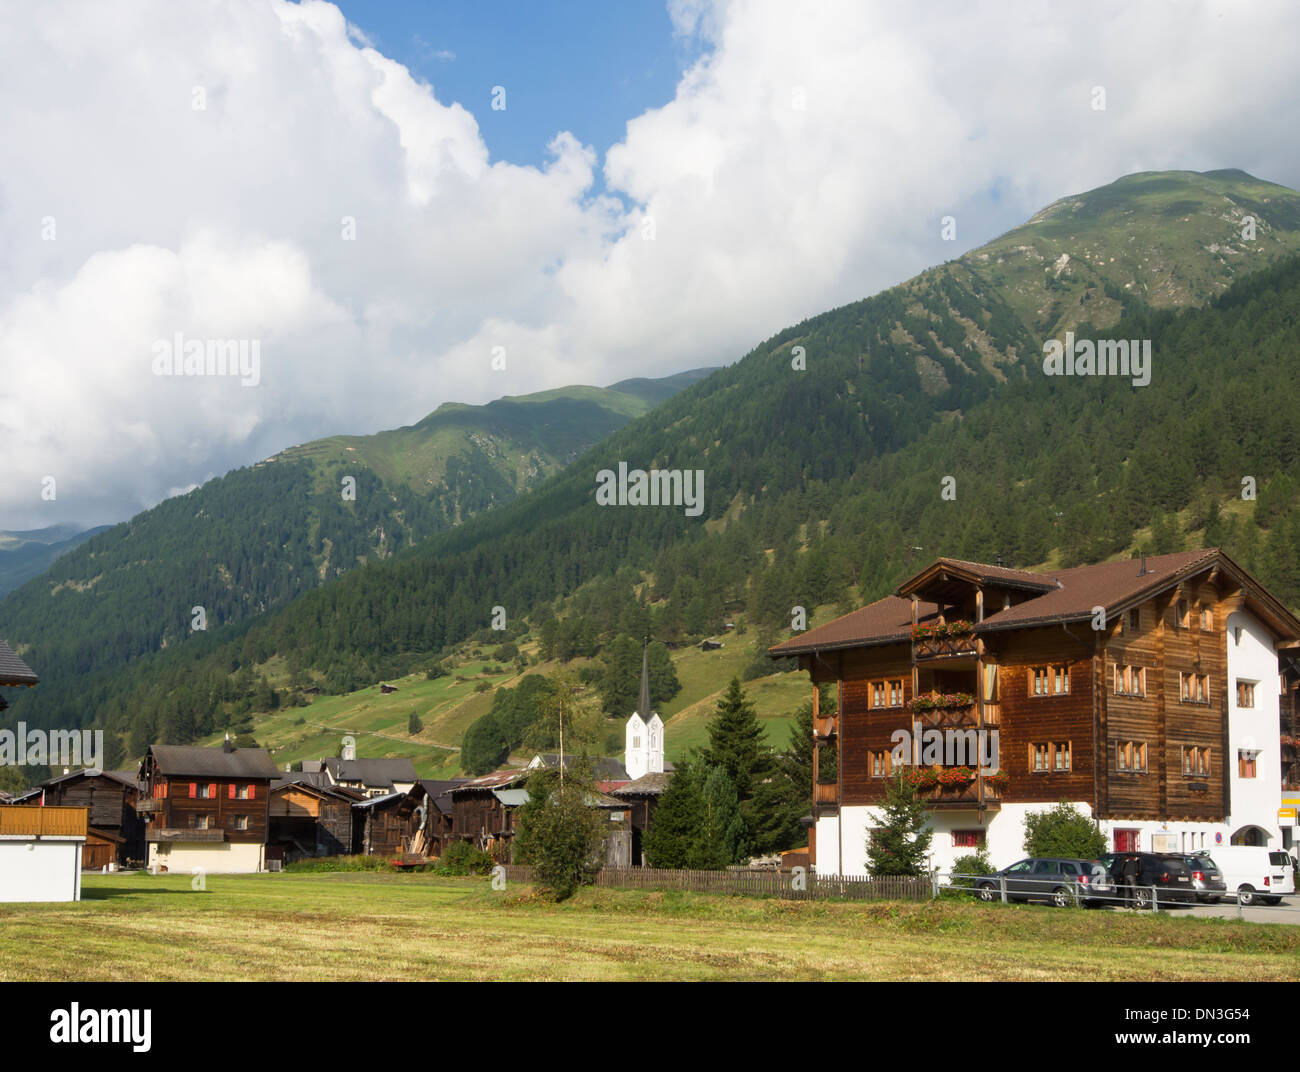 Old and new typical traditional wooden timber houses in the village Ulrichen in the district of Goms in the Swiss alps Stock Photo